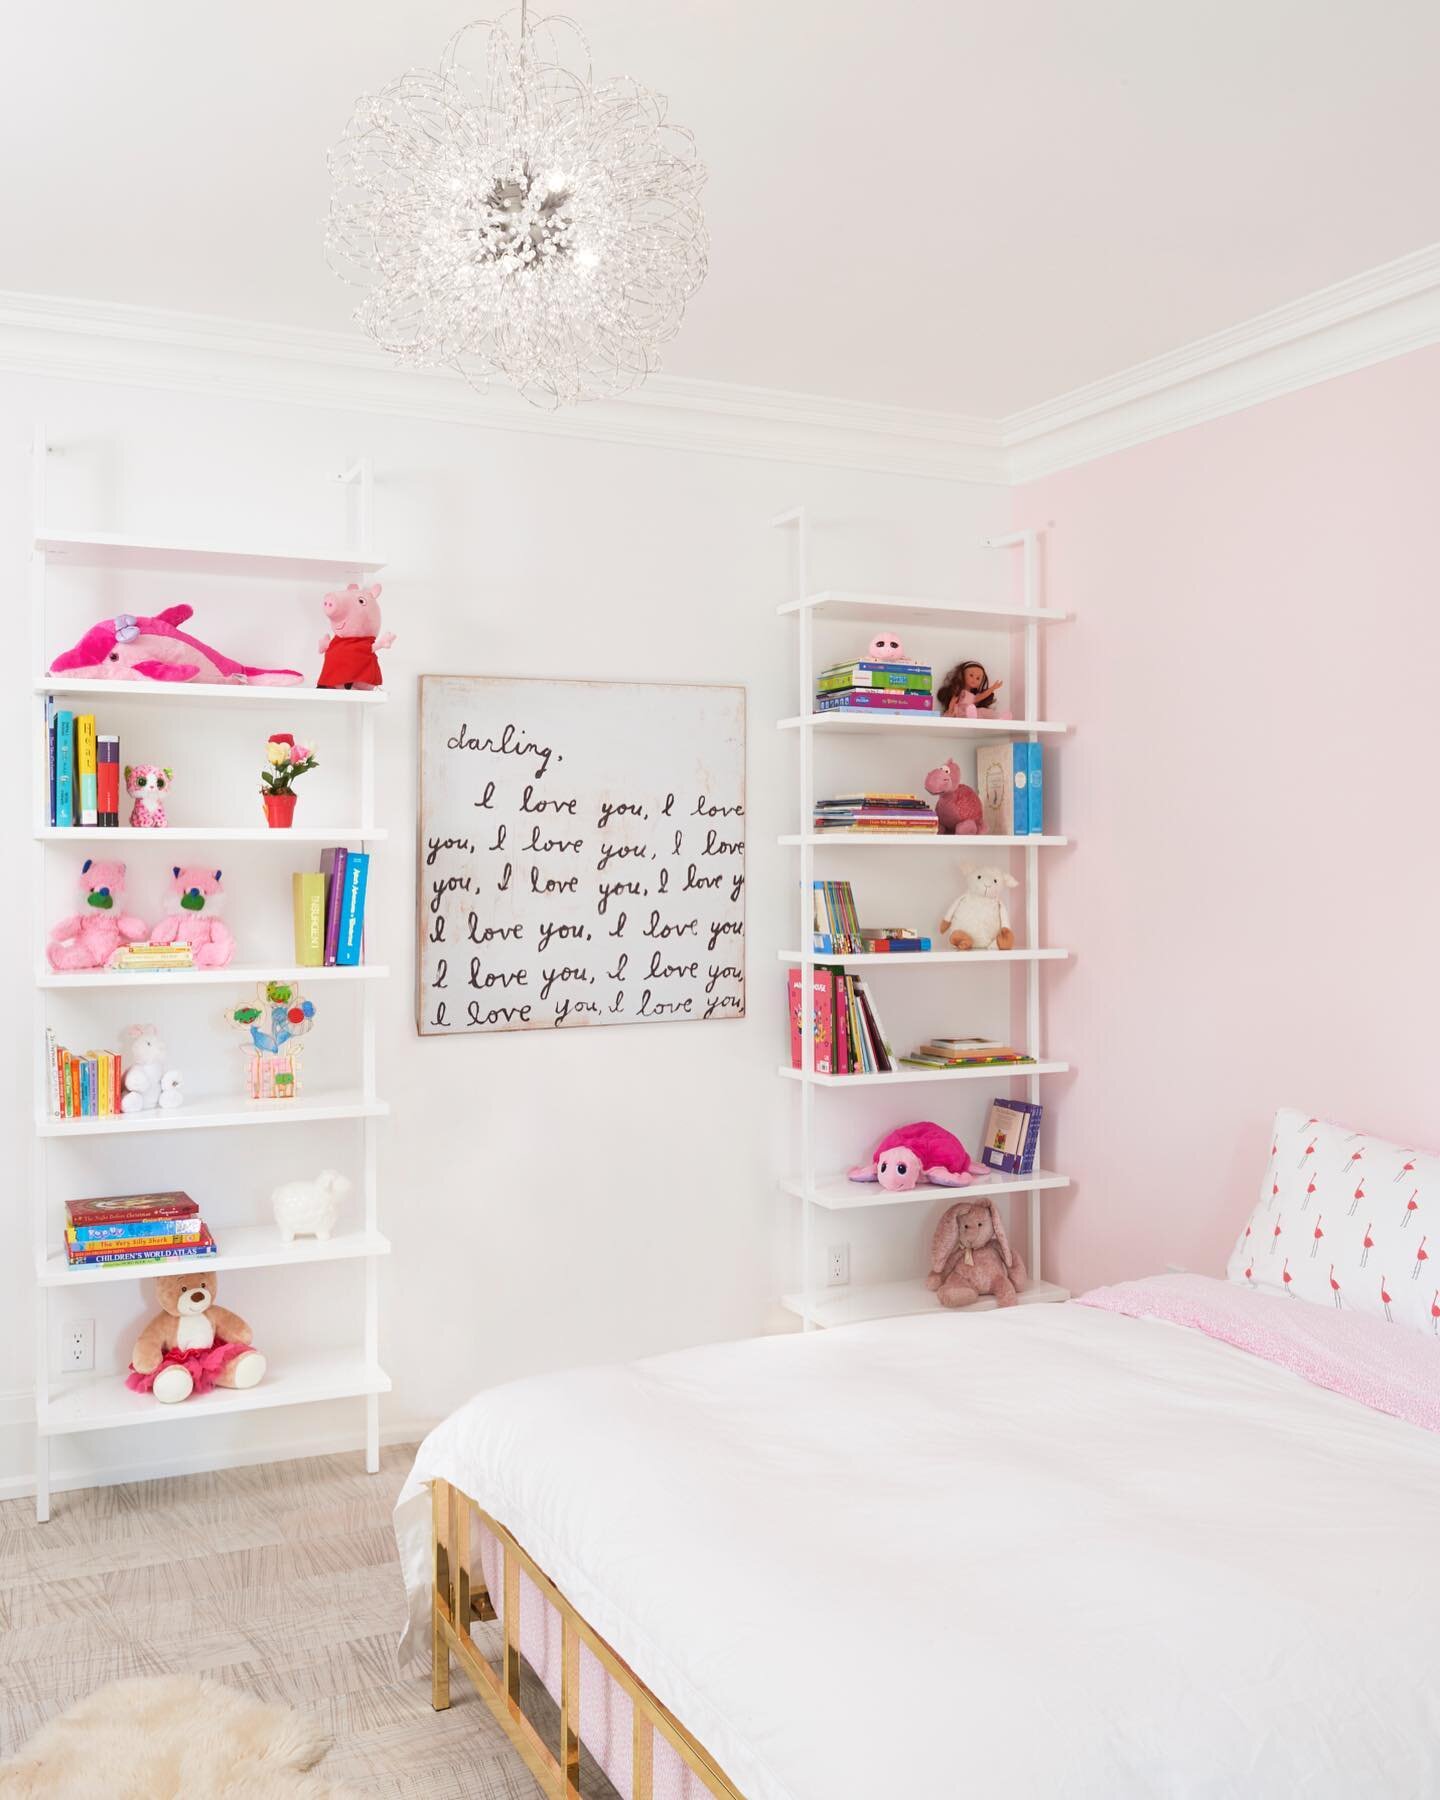 Pretty in pink! This bedroom would make any kid want to spend time in it. Sweet dreams!